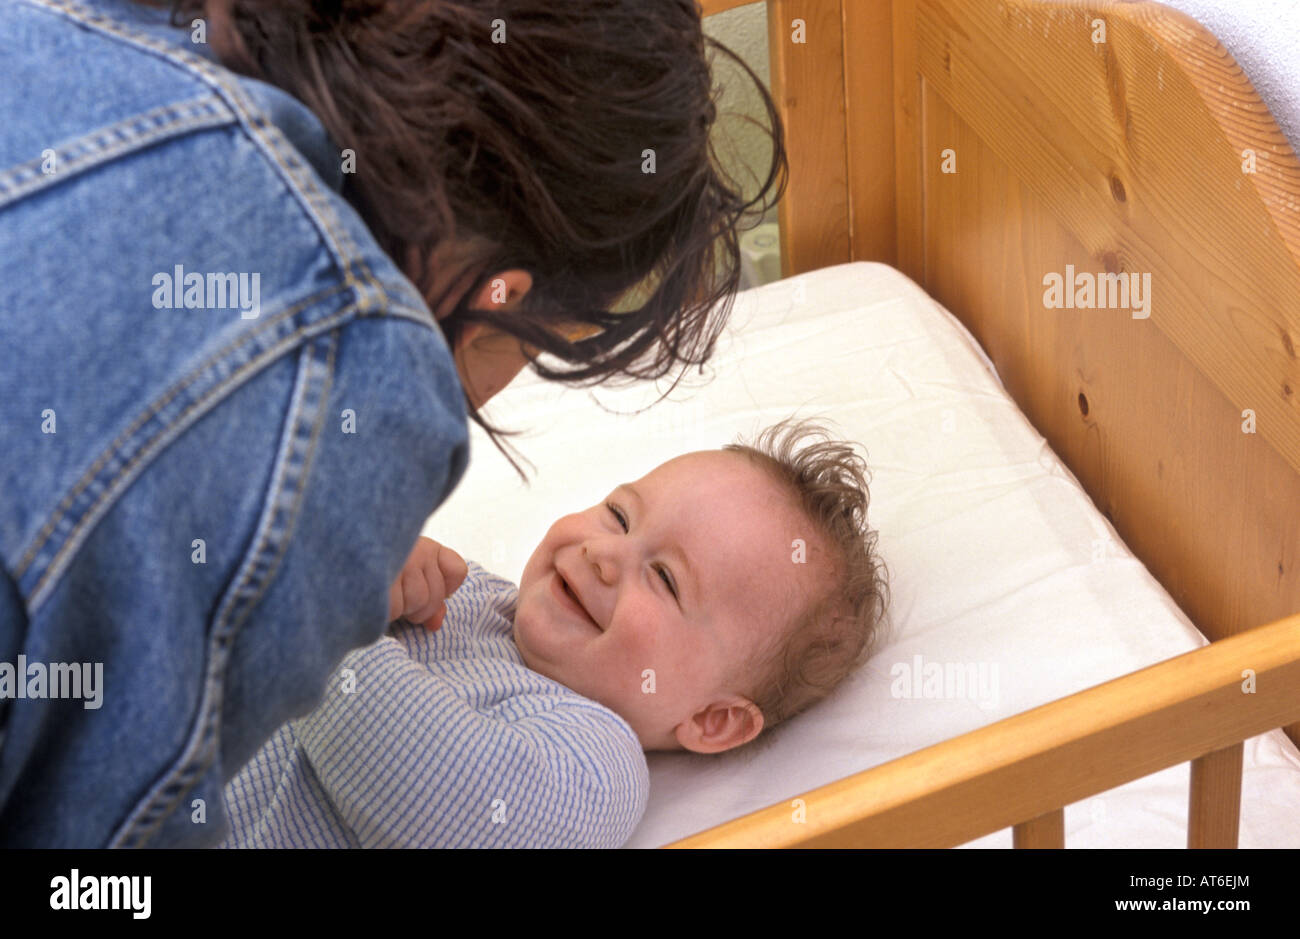 Mother puts baby in bed Stock Photo